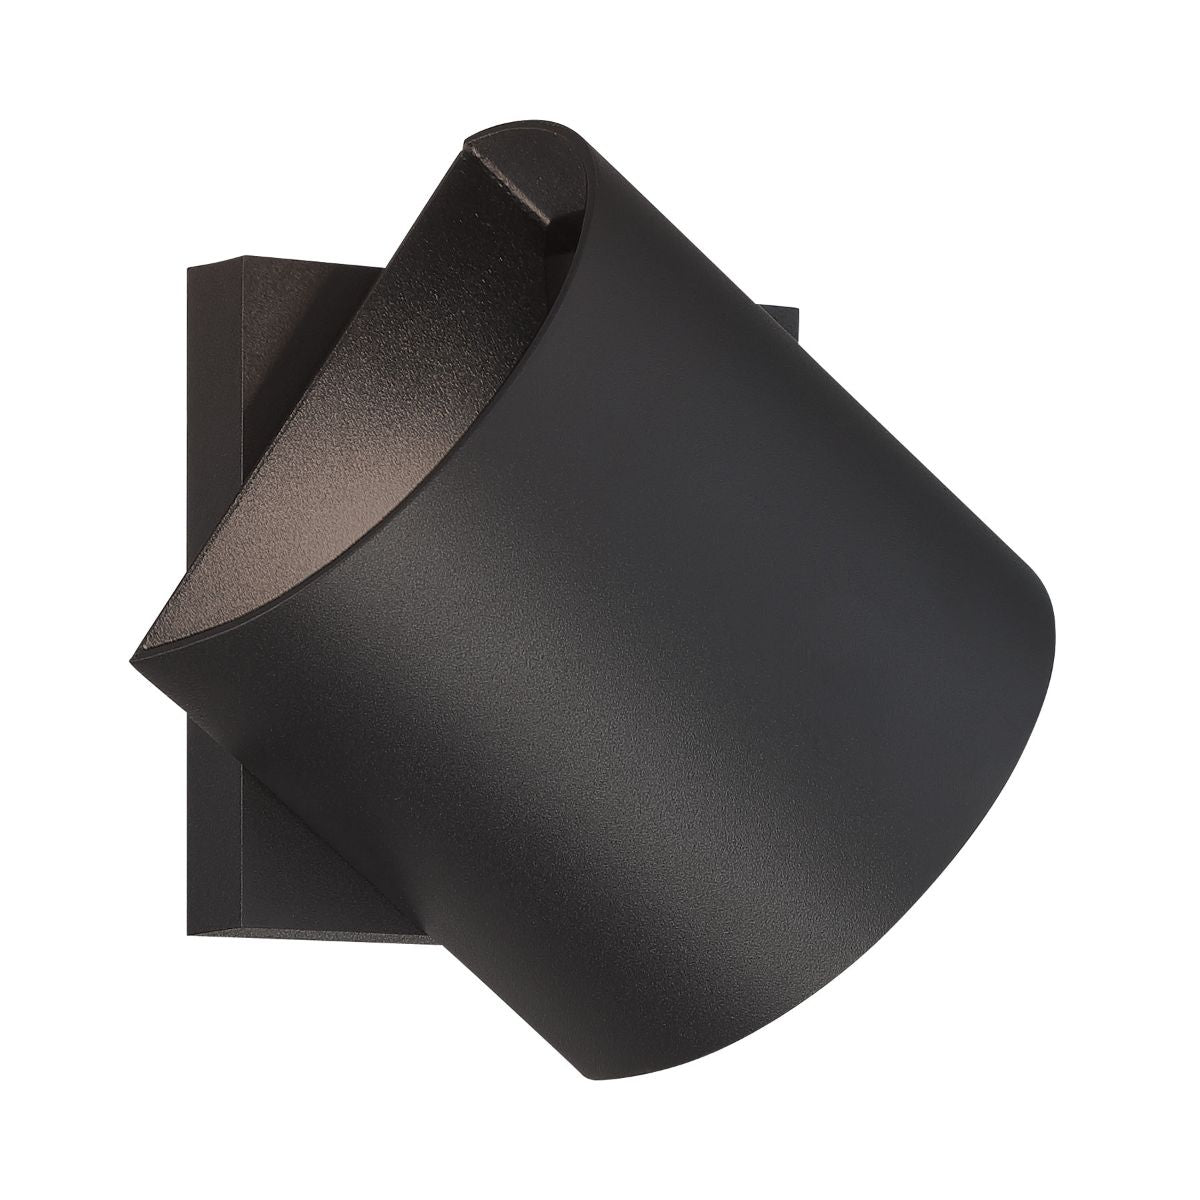 Revolve 5 in. 2 Lights LED Outdoor Wall Sconce Black Finish